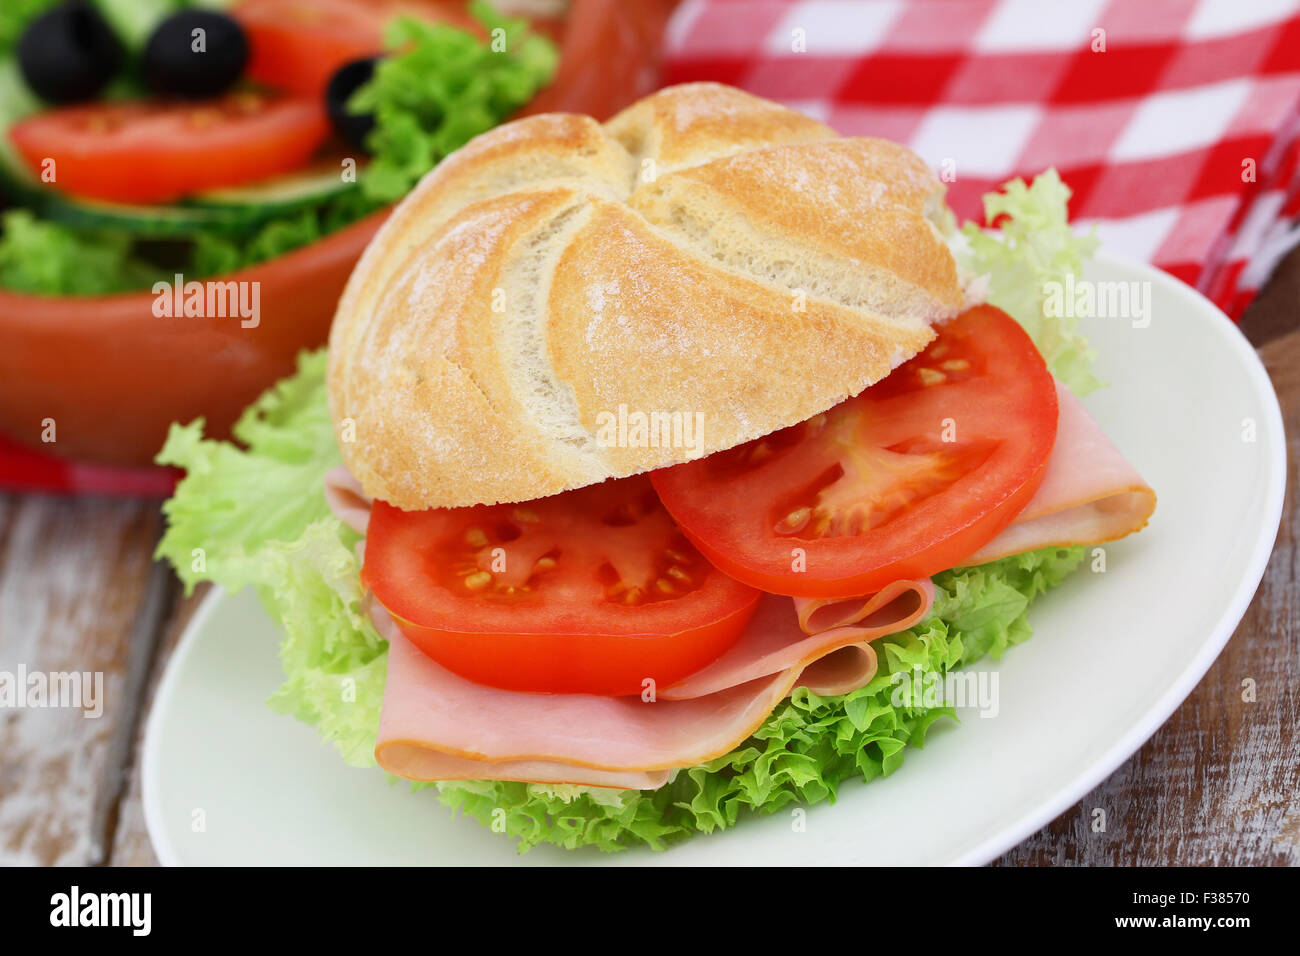 Bread roll with smoked ham, lettuce and tomatoes Stock Photo